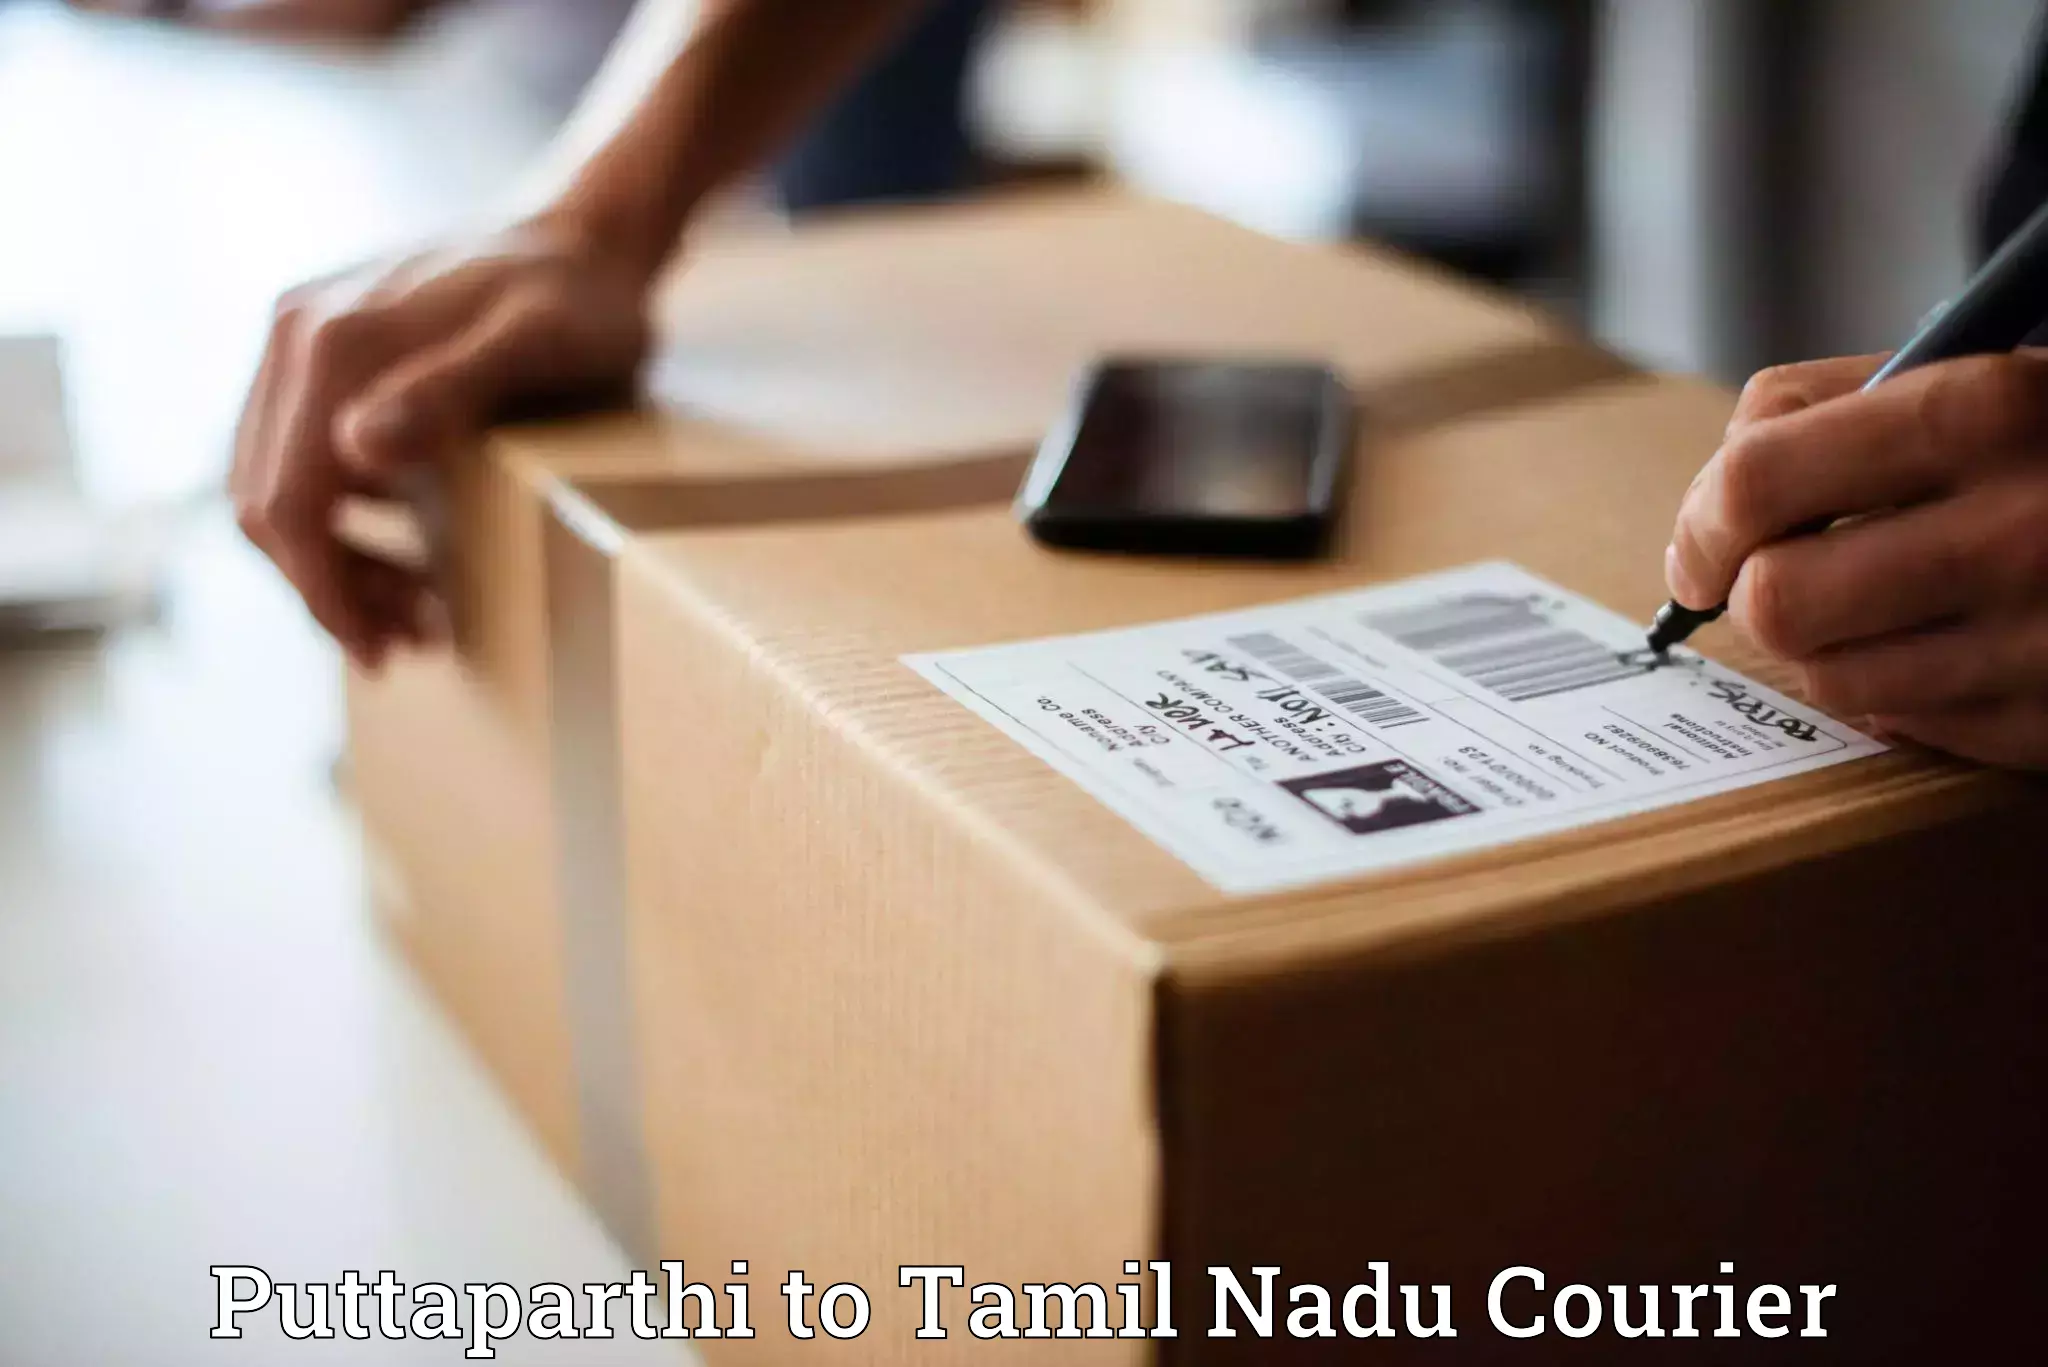 Parcel handling and care Puttaparthi to Tamil Nadu